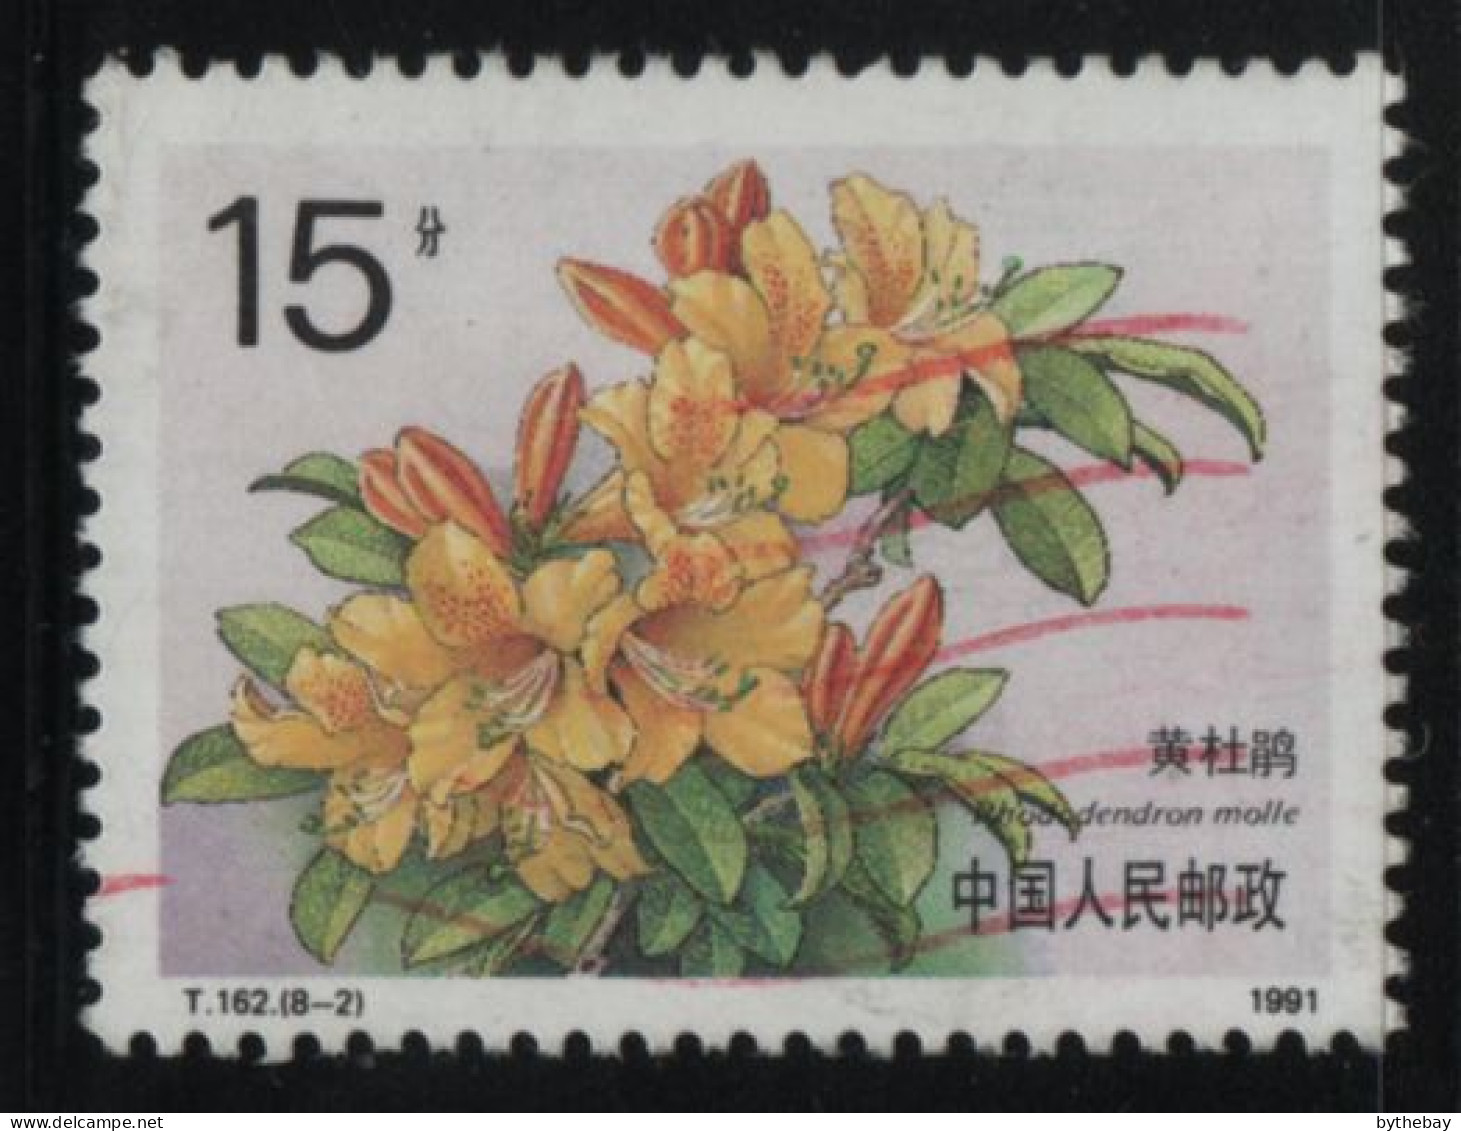 China People's Republic 1991 Used Sc 2331 15f Molle Rhododendron - Used Stamps